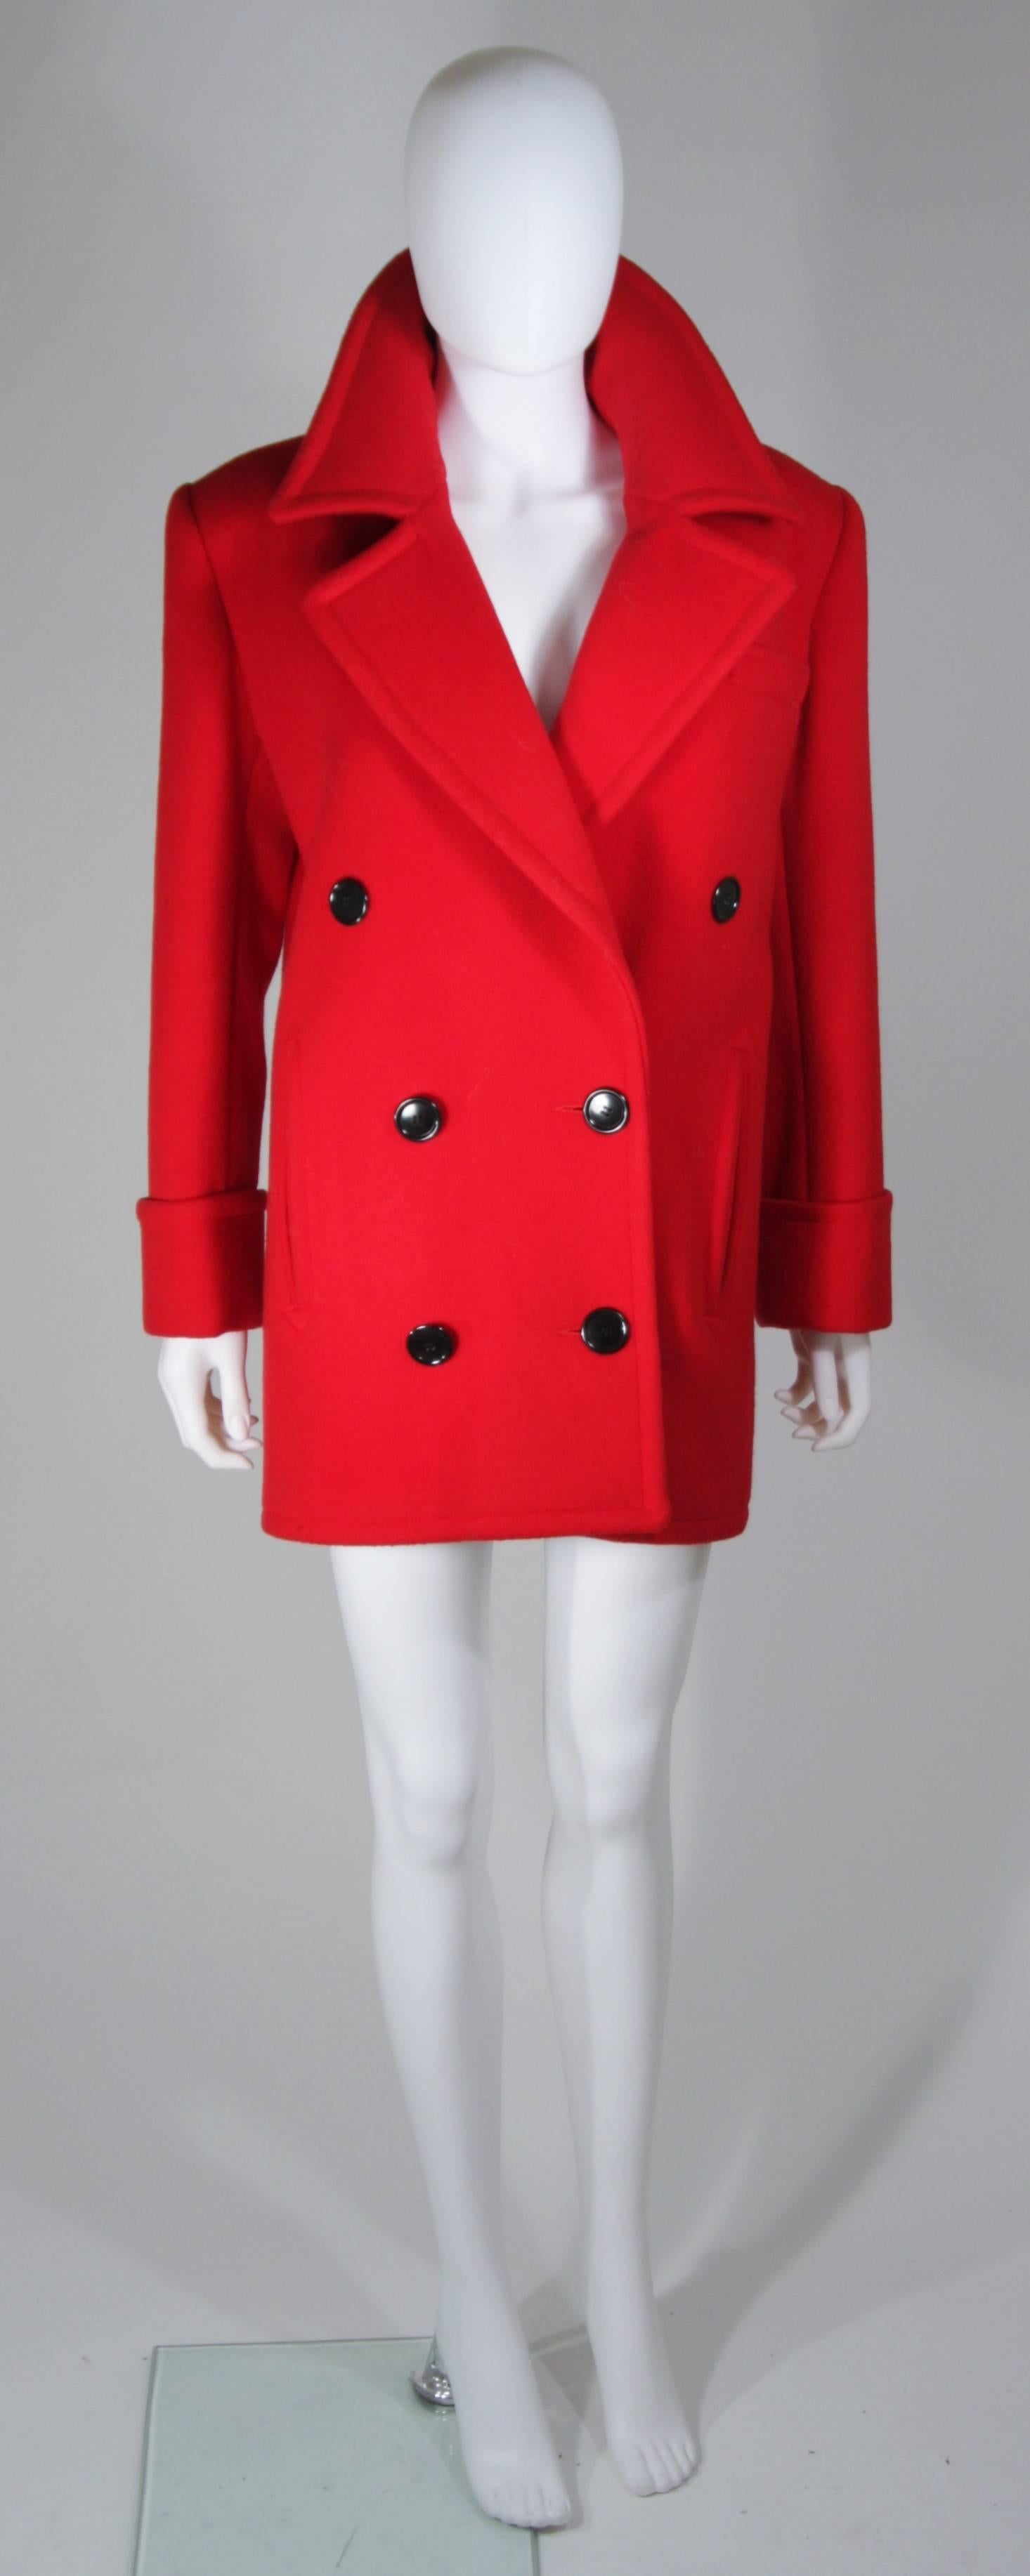   This Calvin Klein coat is composed of a vibrant red wool. There are side pockets and front button closures. In excellent vintage condition. 

  **Please cross-reference measurements for personal accuracy. Size in description box is an estimation.